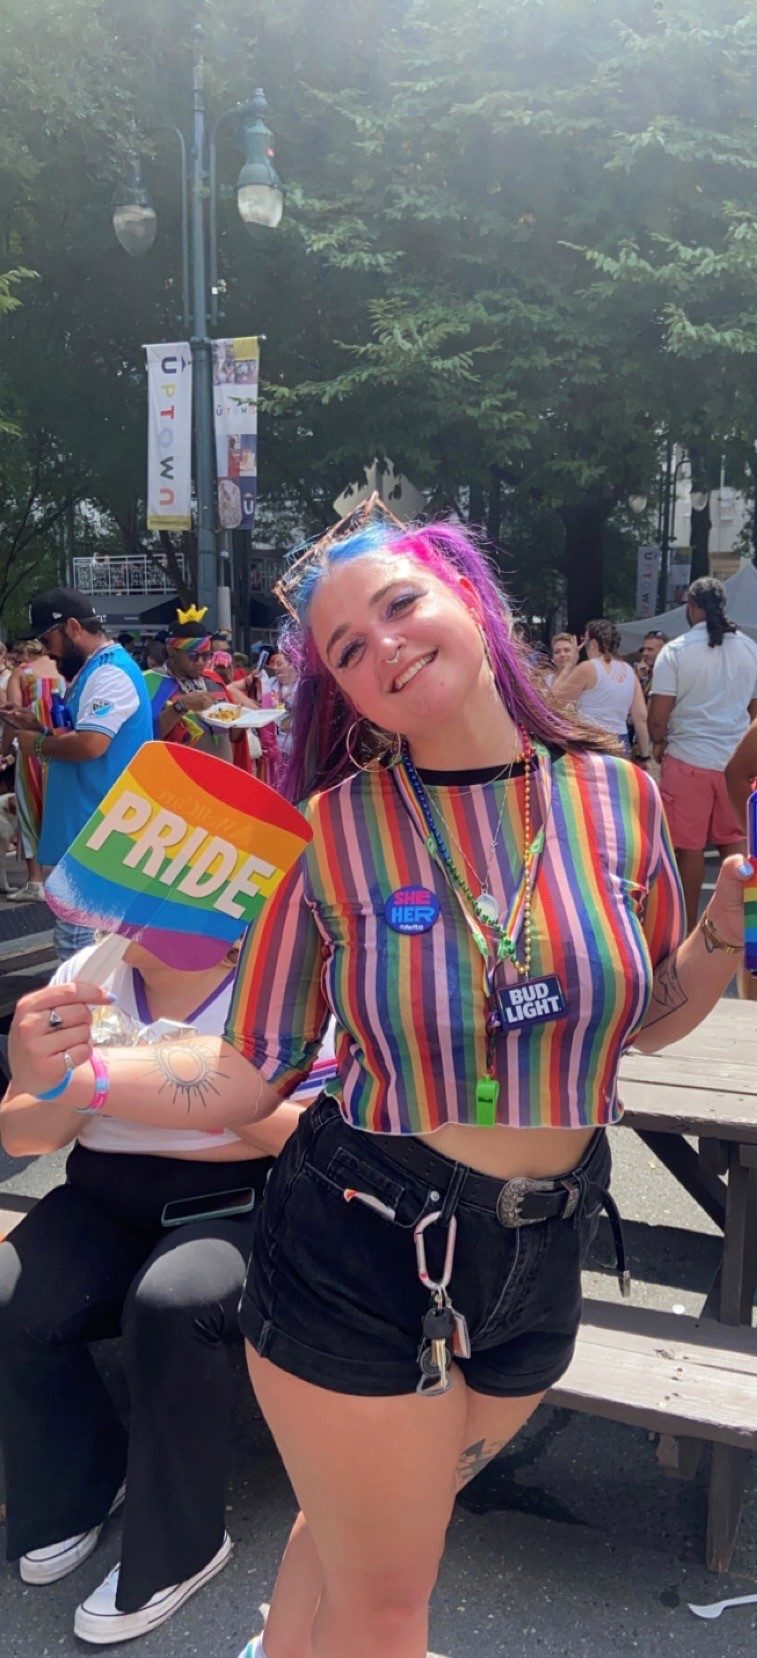 Stefany Harden smiling and holding up a Pride sign